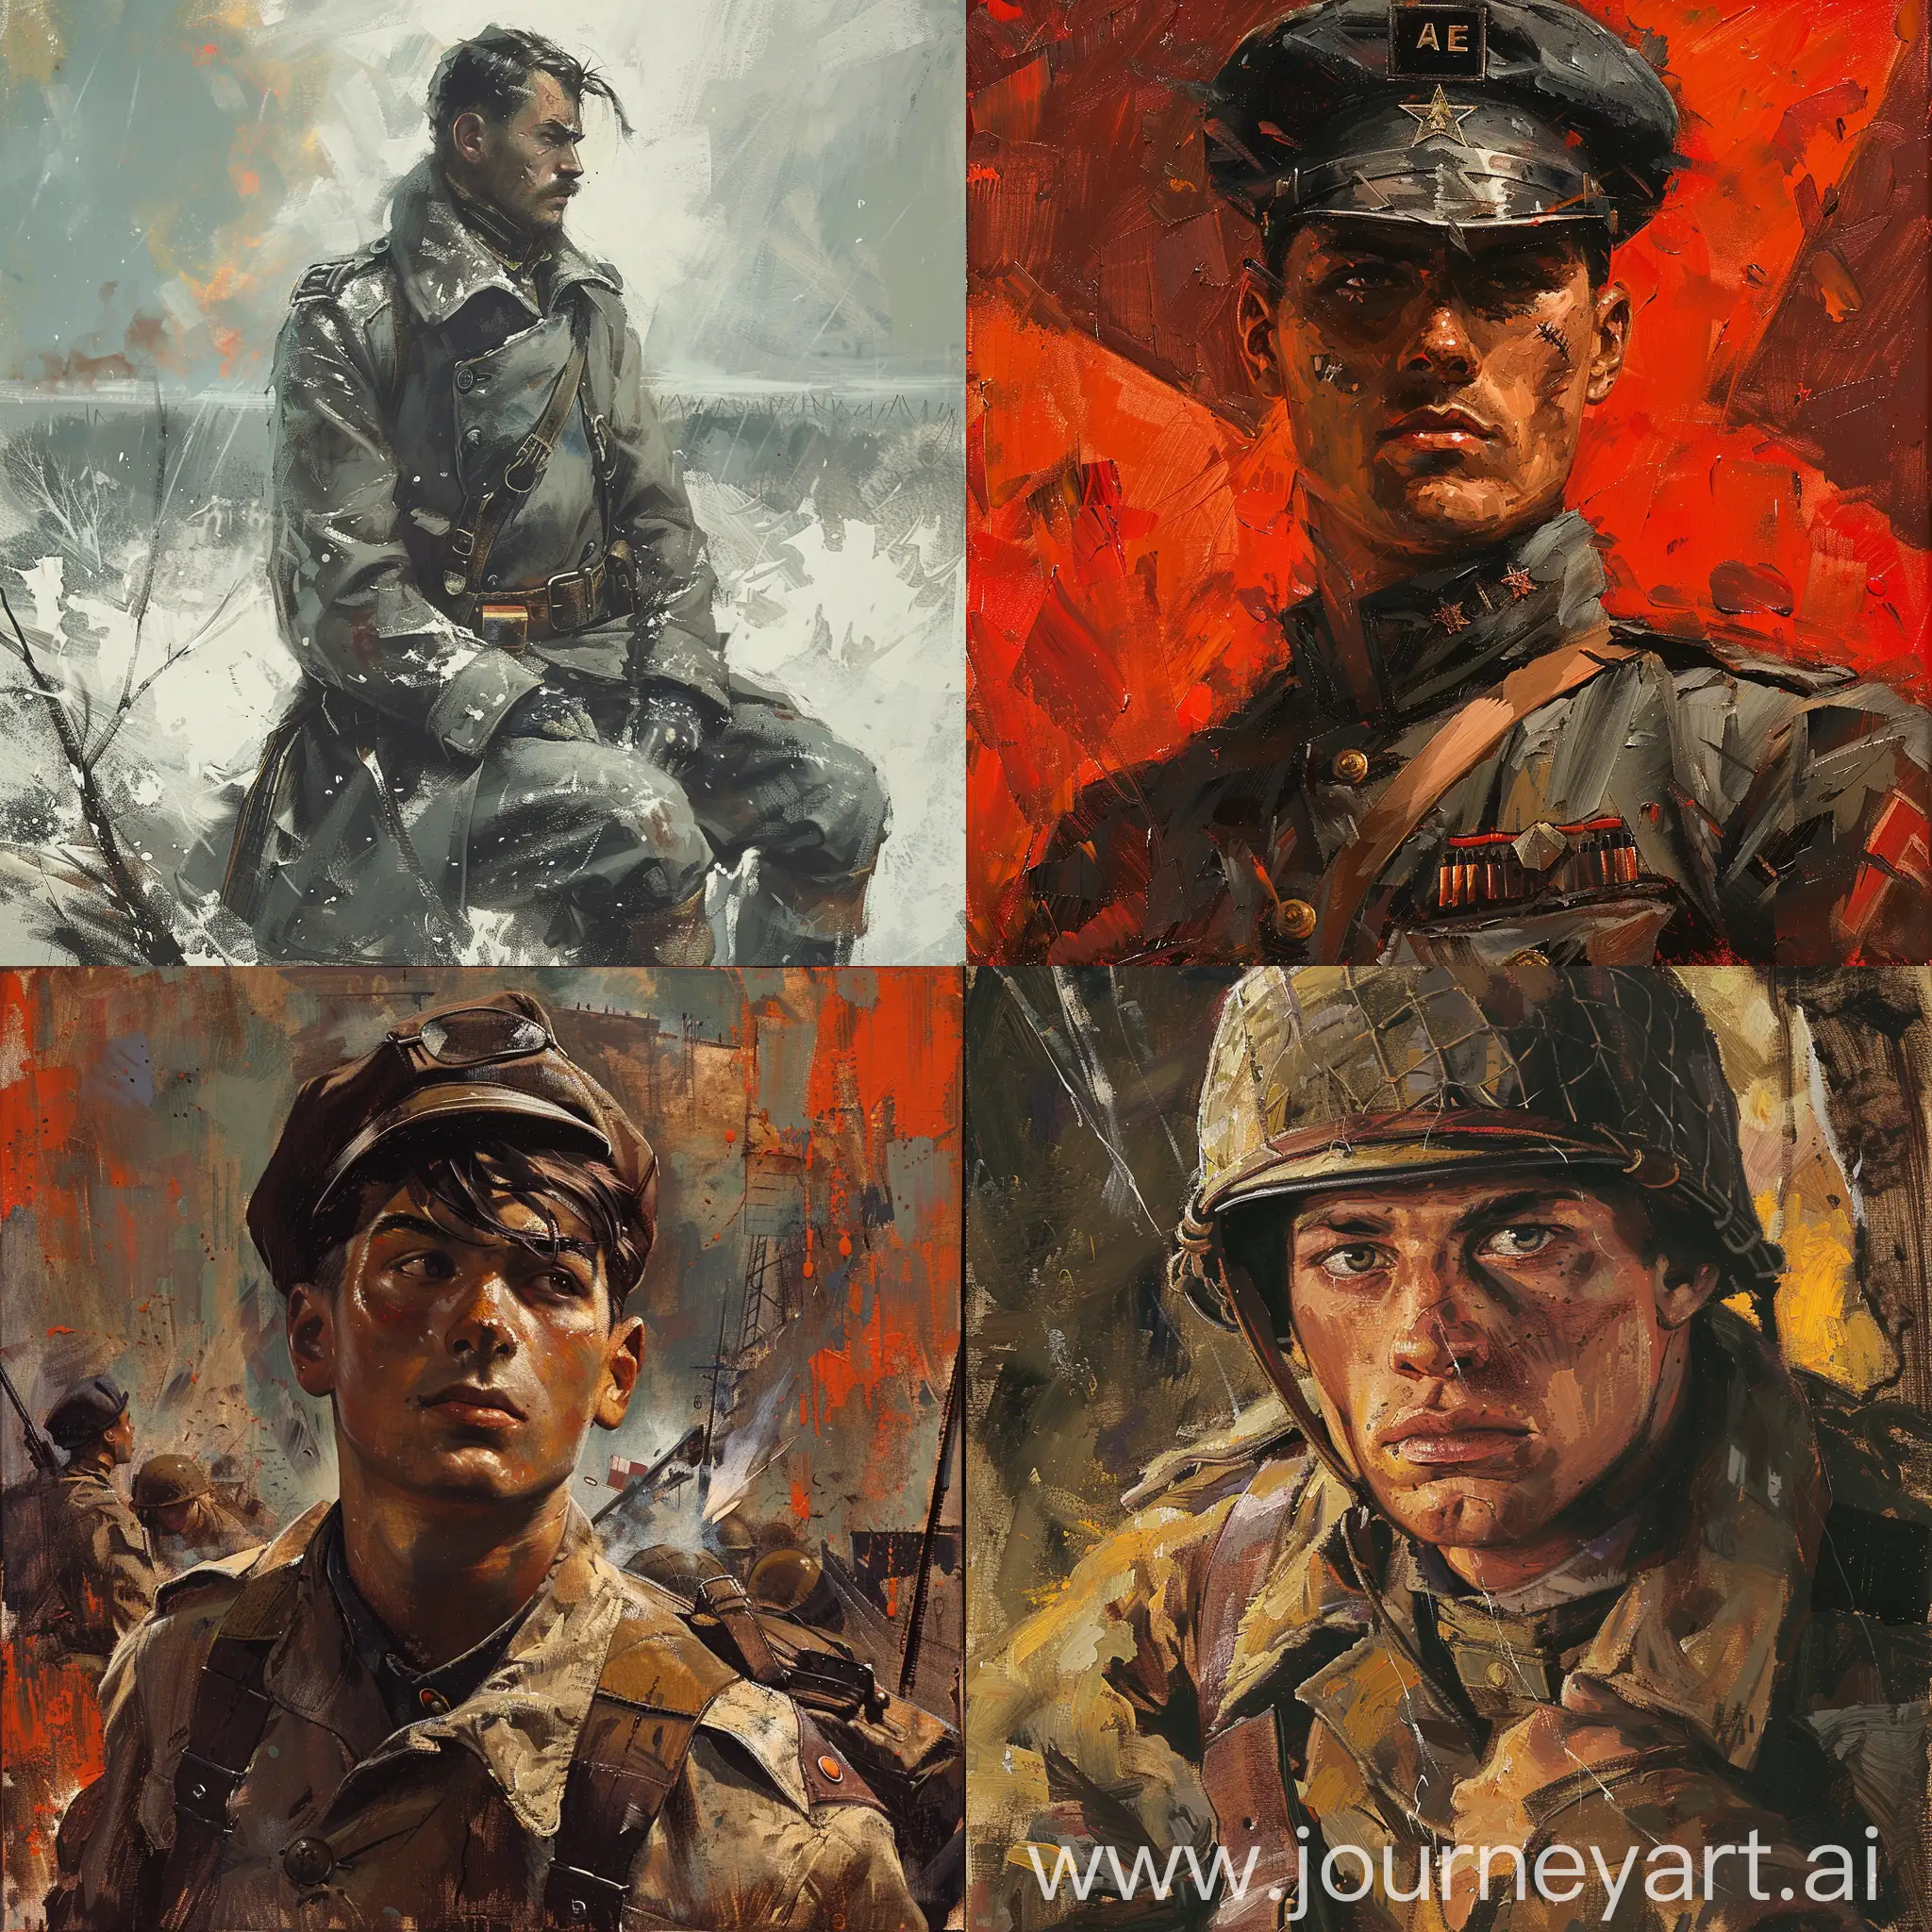 draw a cover for a novel that contain a french soldier in world war 2  use oil painting